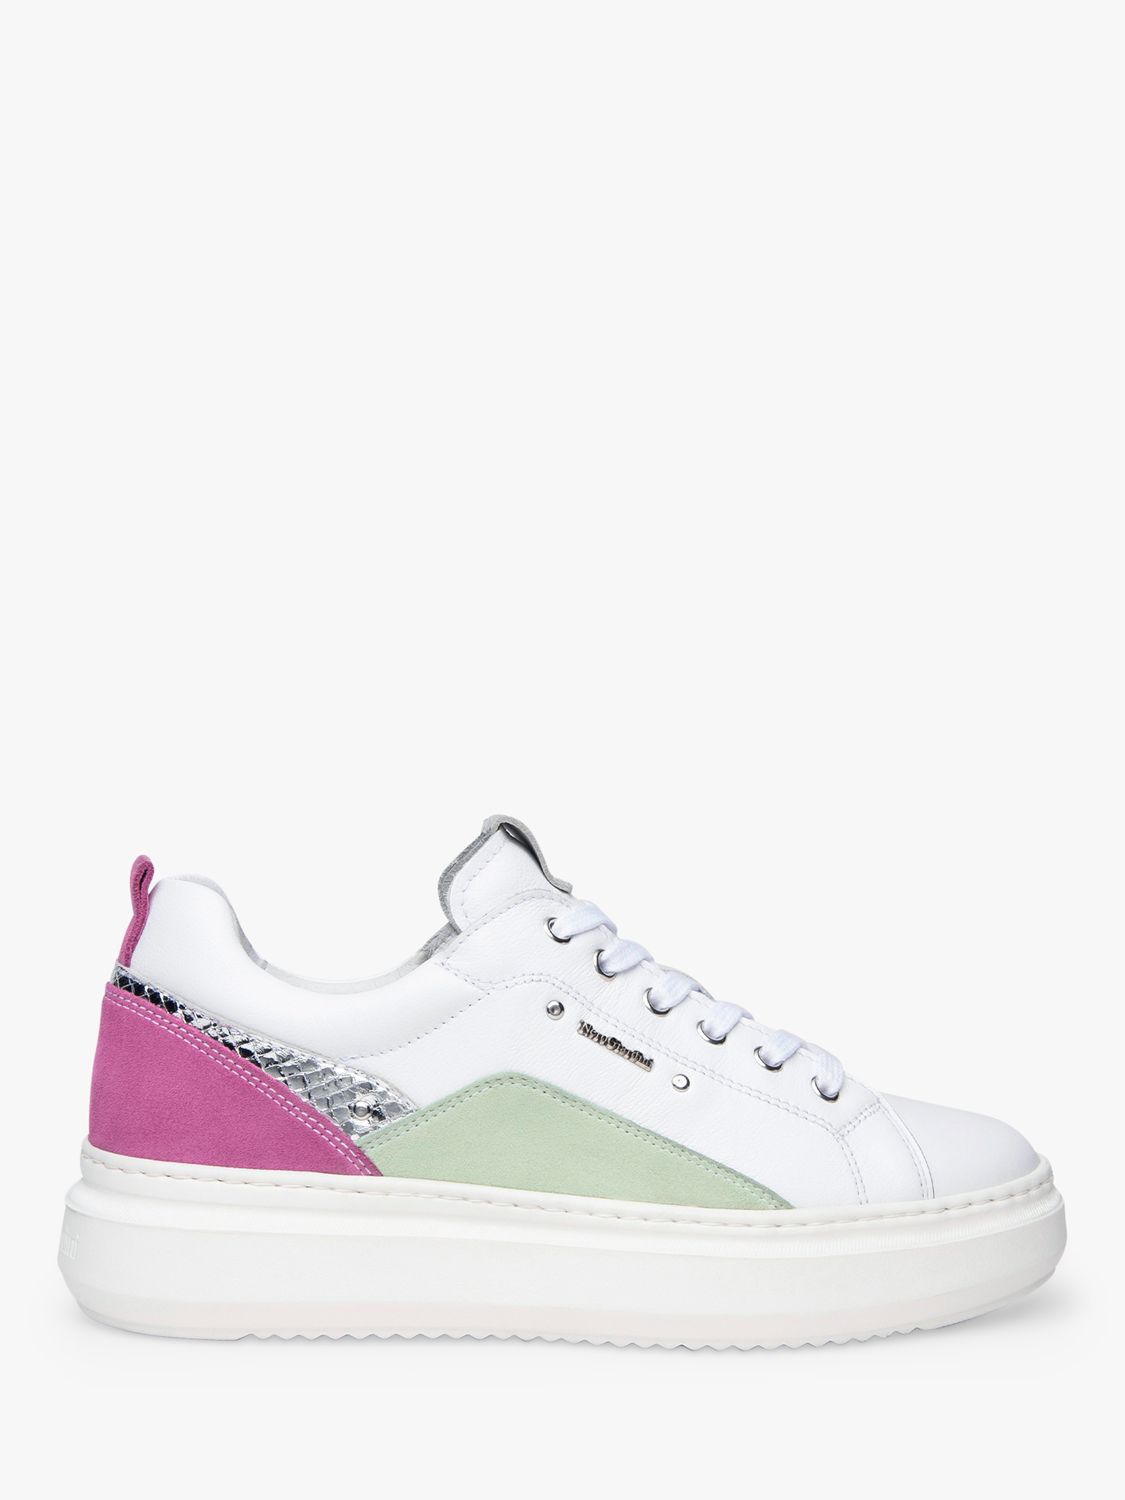 NeroGiardini Leather Lace Up Trainers, White/Pink at John Lewis & Partners